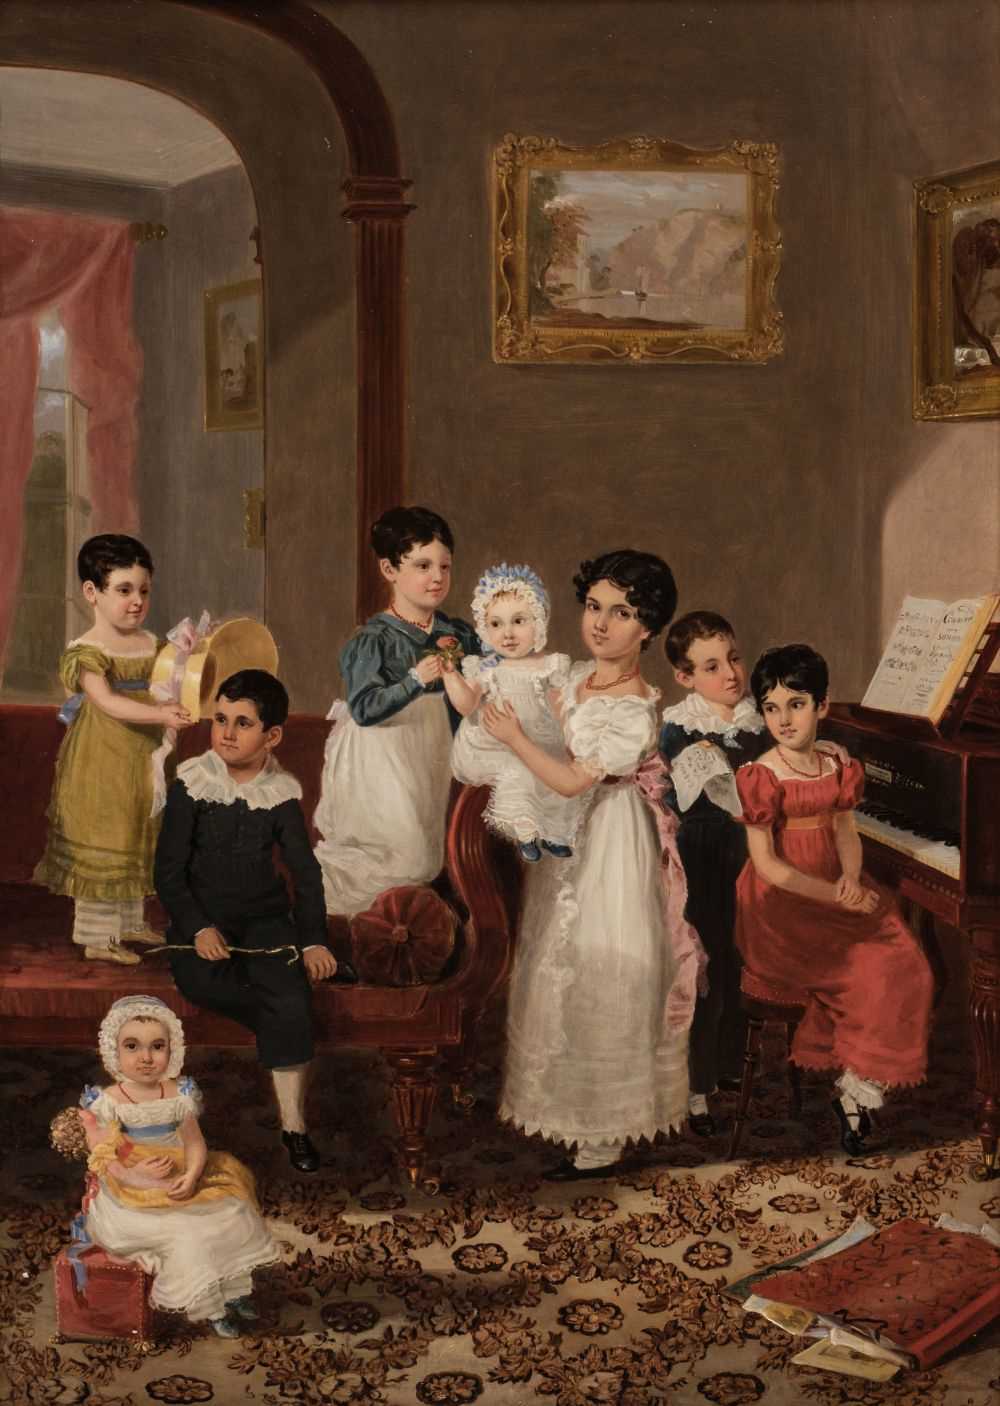 Lot 66 - Rippingille (Edward Villiers, 1798-1859). Family group of children in a drawing room, circa 1820s